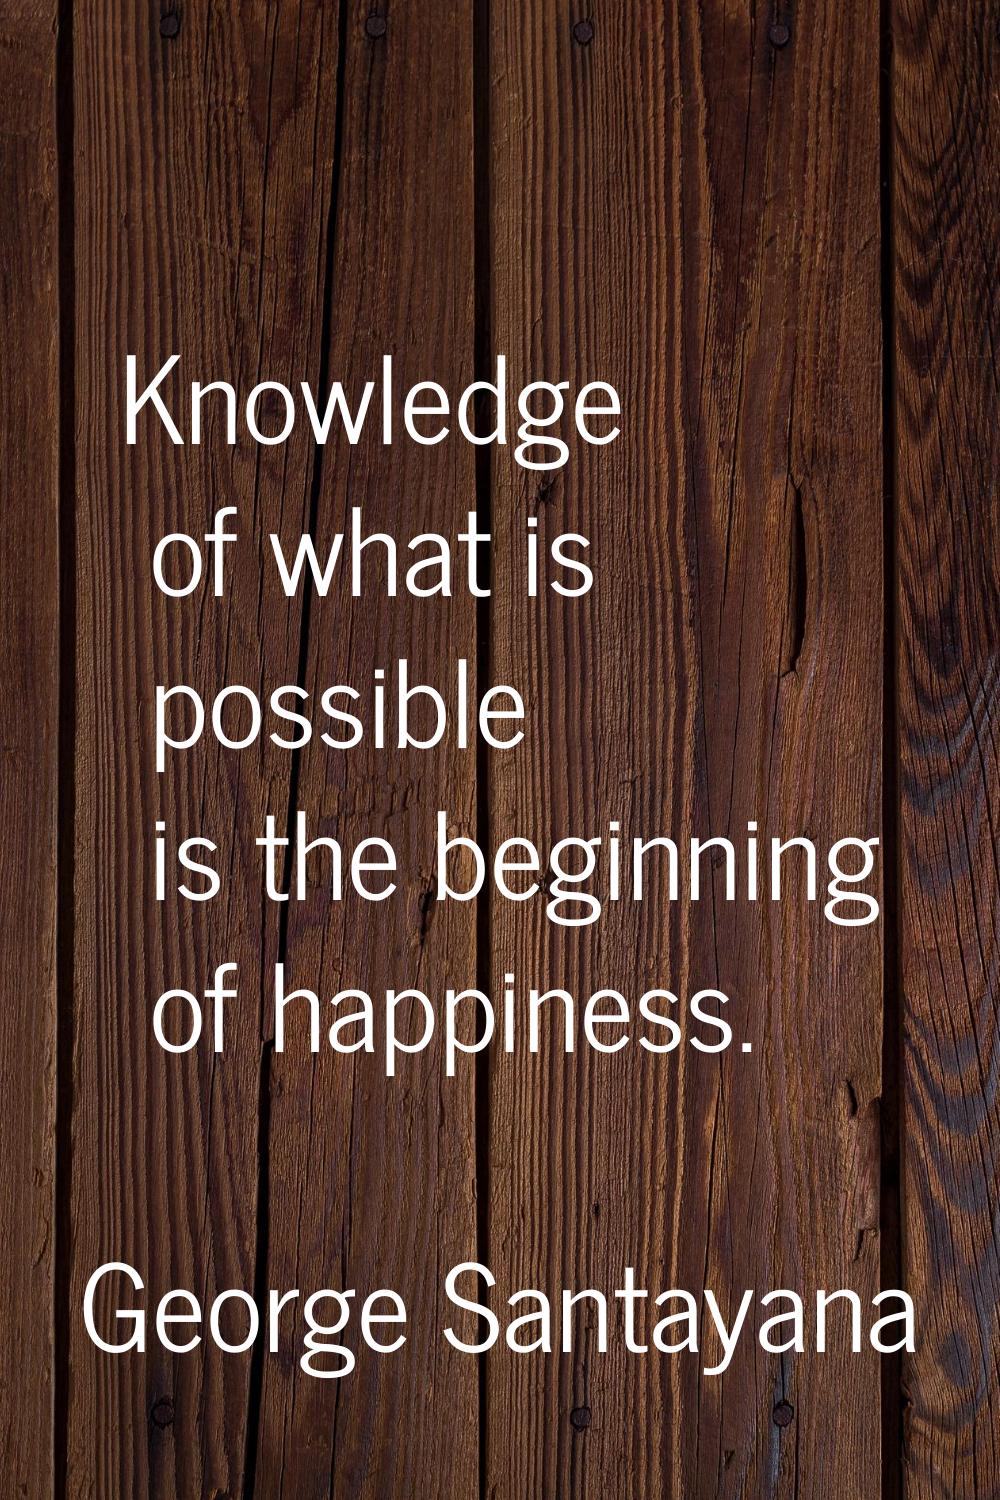 Knowledge of what is possible is the beginning of happiness.